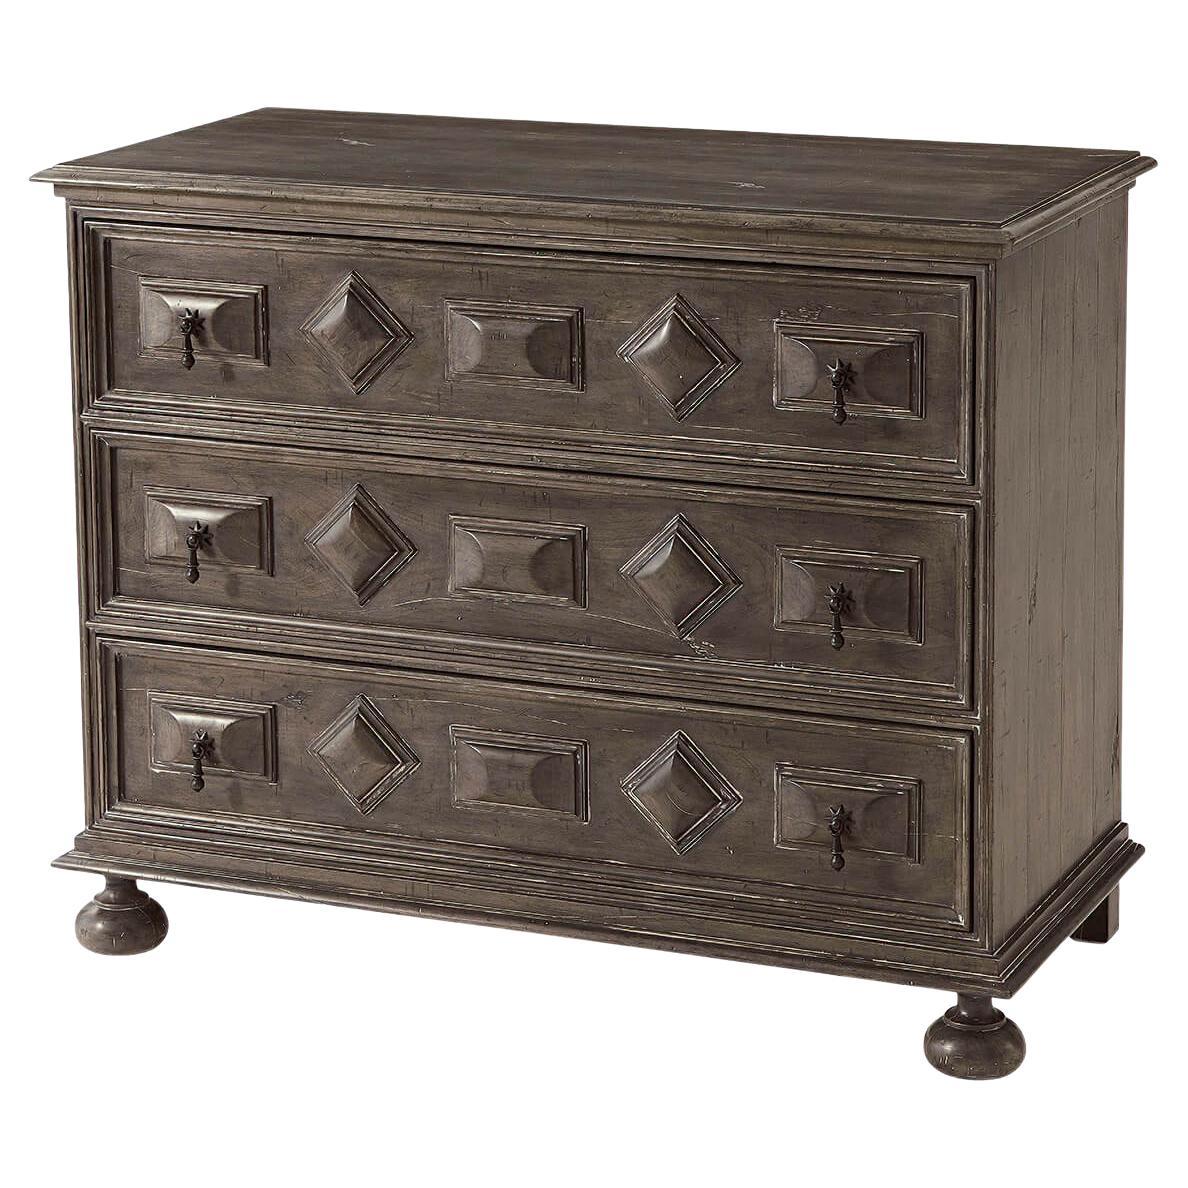 European Antiqued Chest of Drawers